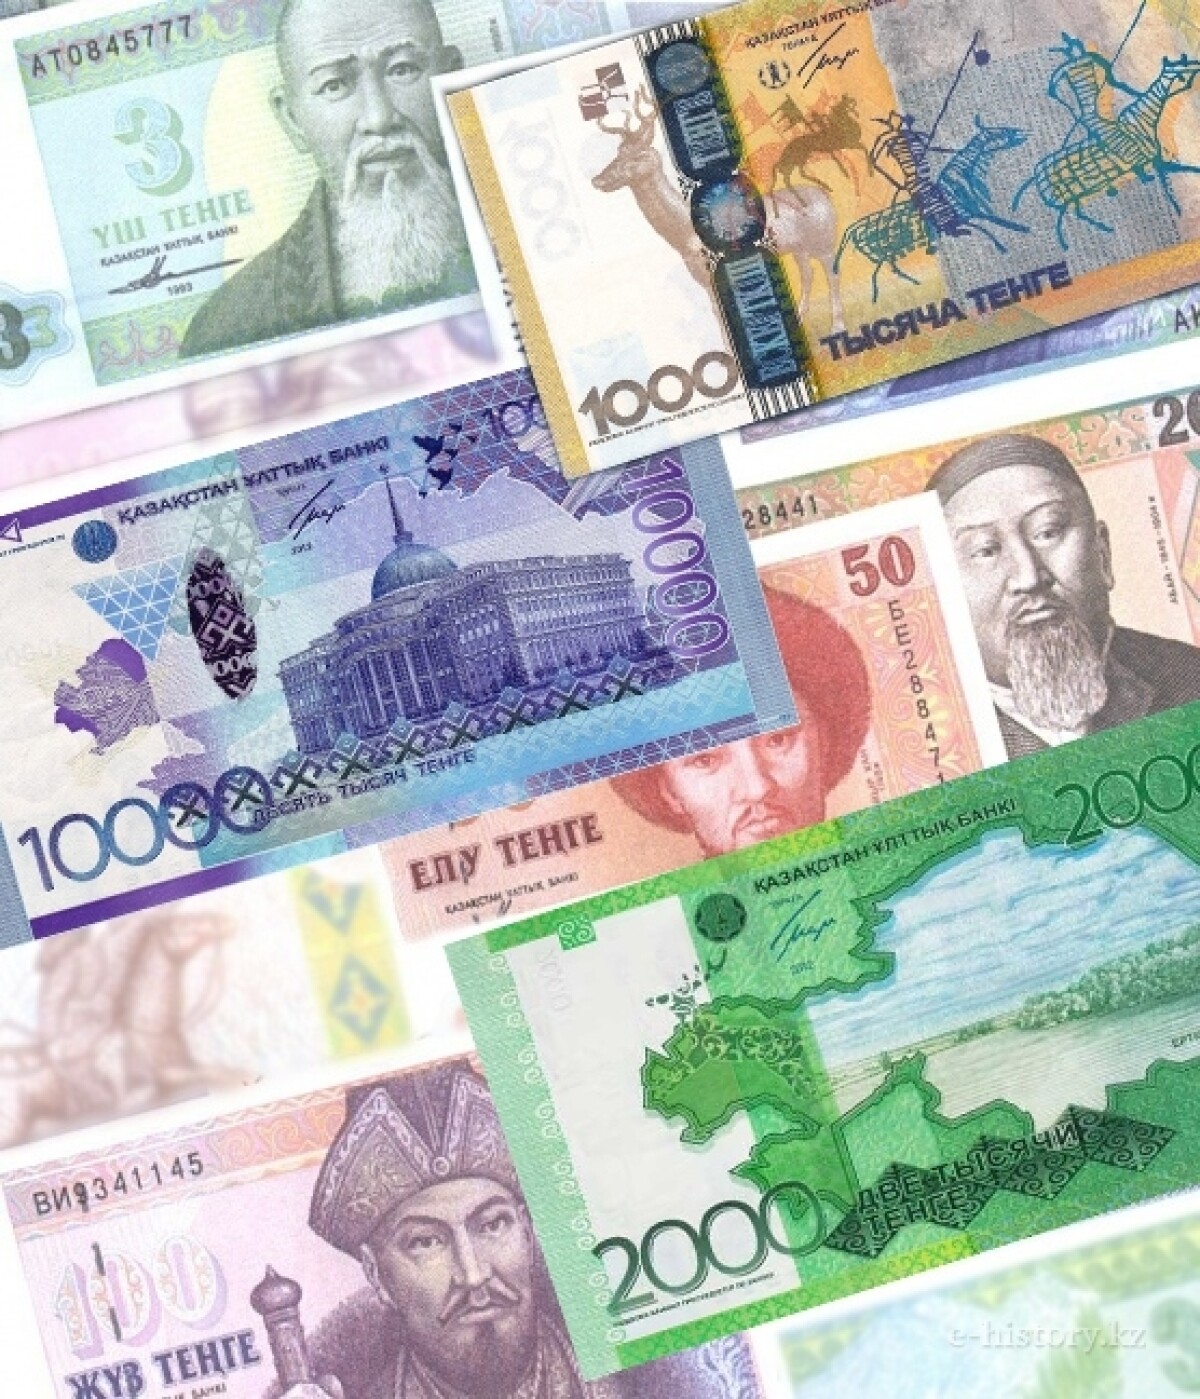 The Day of the national currency - tenge - e-history.kz